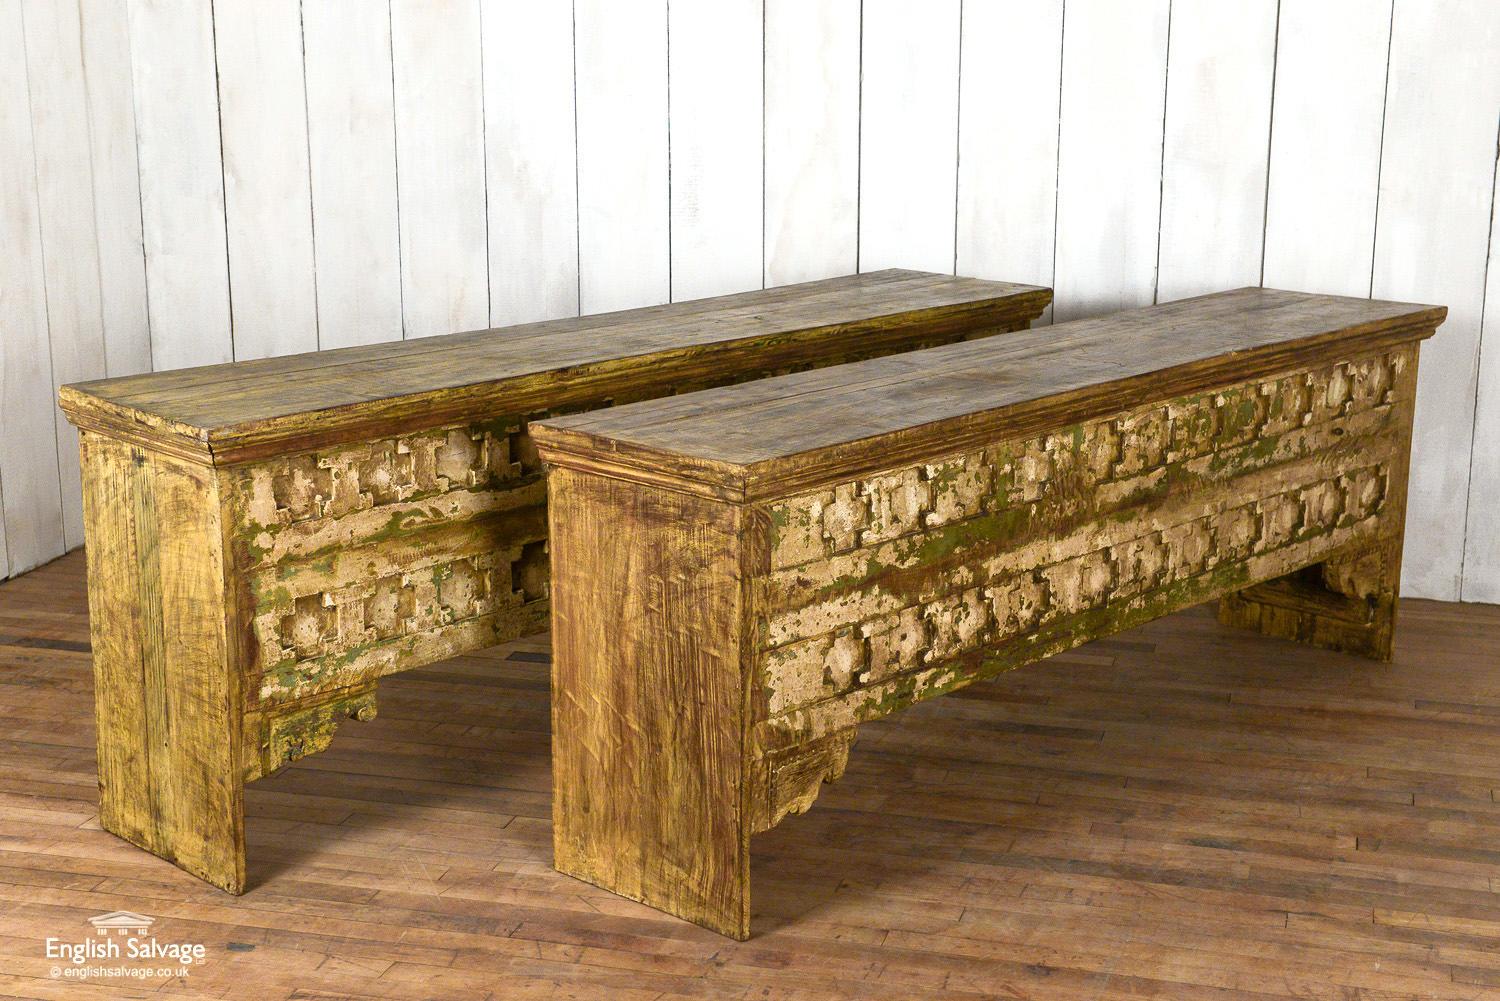 Striking console table made from reclaimed teak. This is a very unusual table with a geometric relief design to the front. The naïve construction is enhanced by paint remnants and saw marks. It has a weathered appearance and at over 2m wide is an